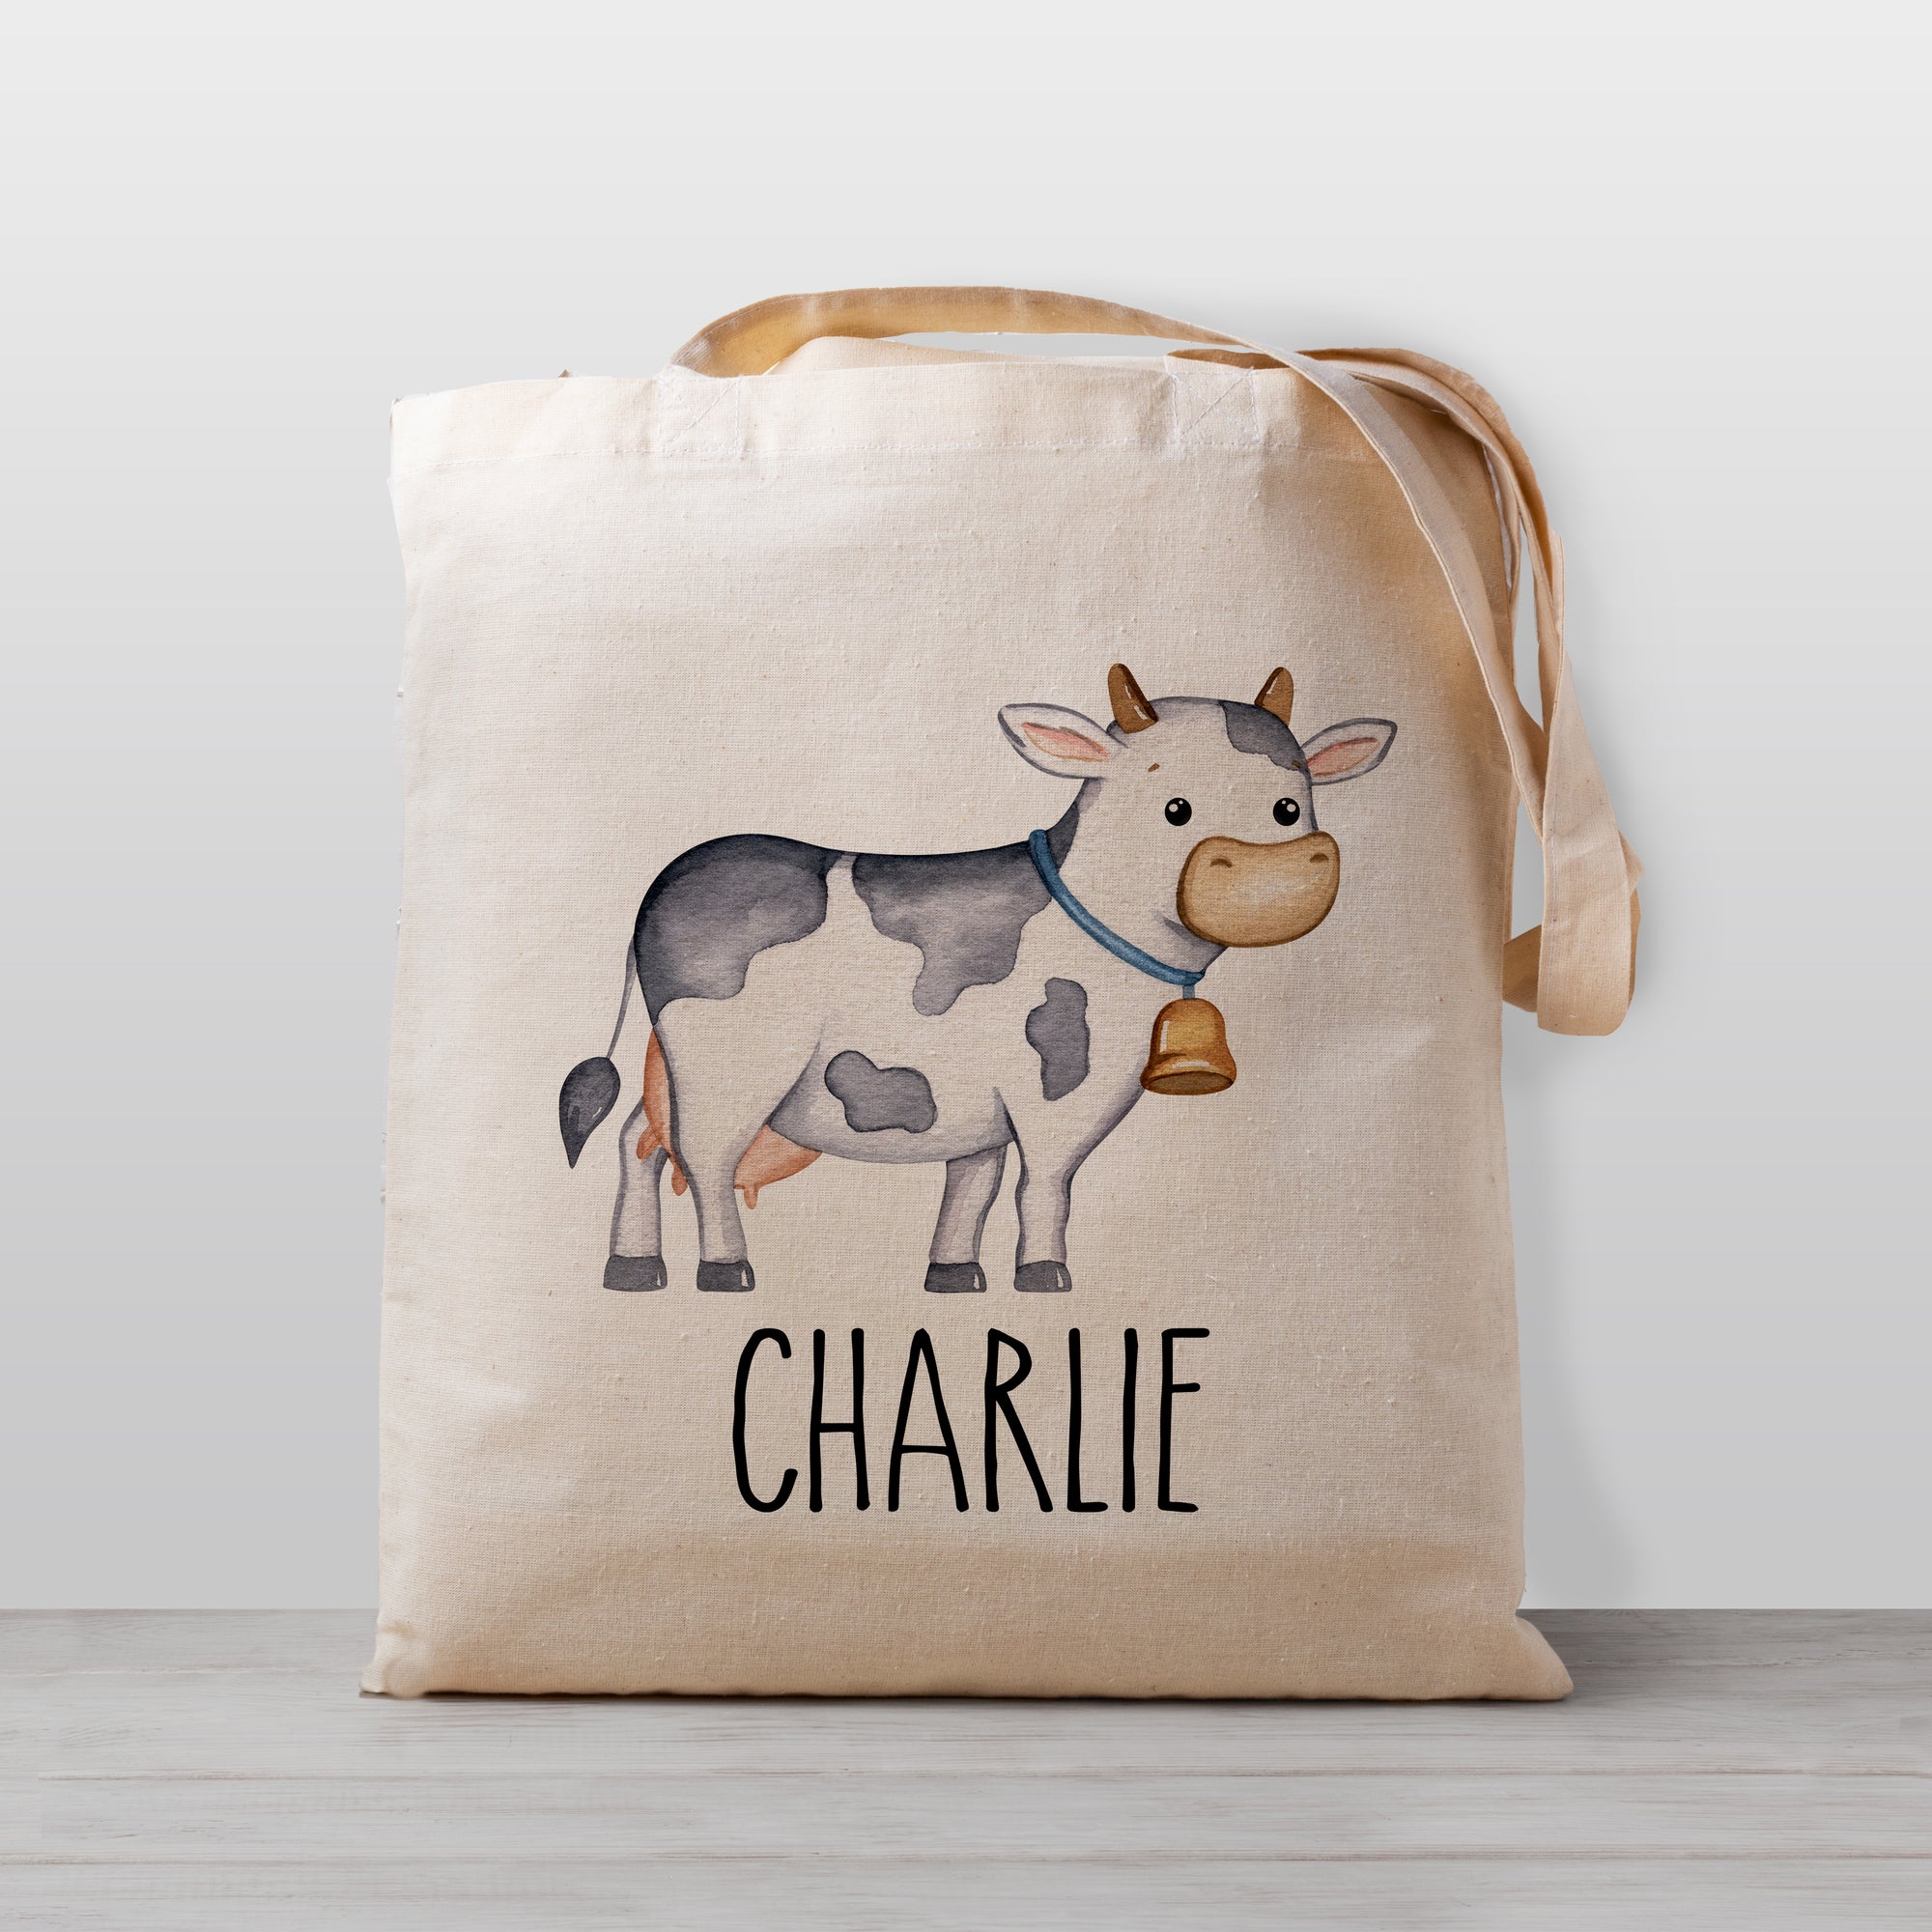 Cow tote bag for kids, personalized with your child's name. Great for daycare, preschool, or just hauling your toys around. 100% natural cotton canvas, and sized so they are easy for your little one to carry